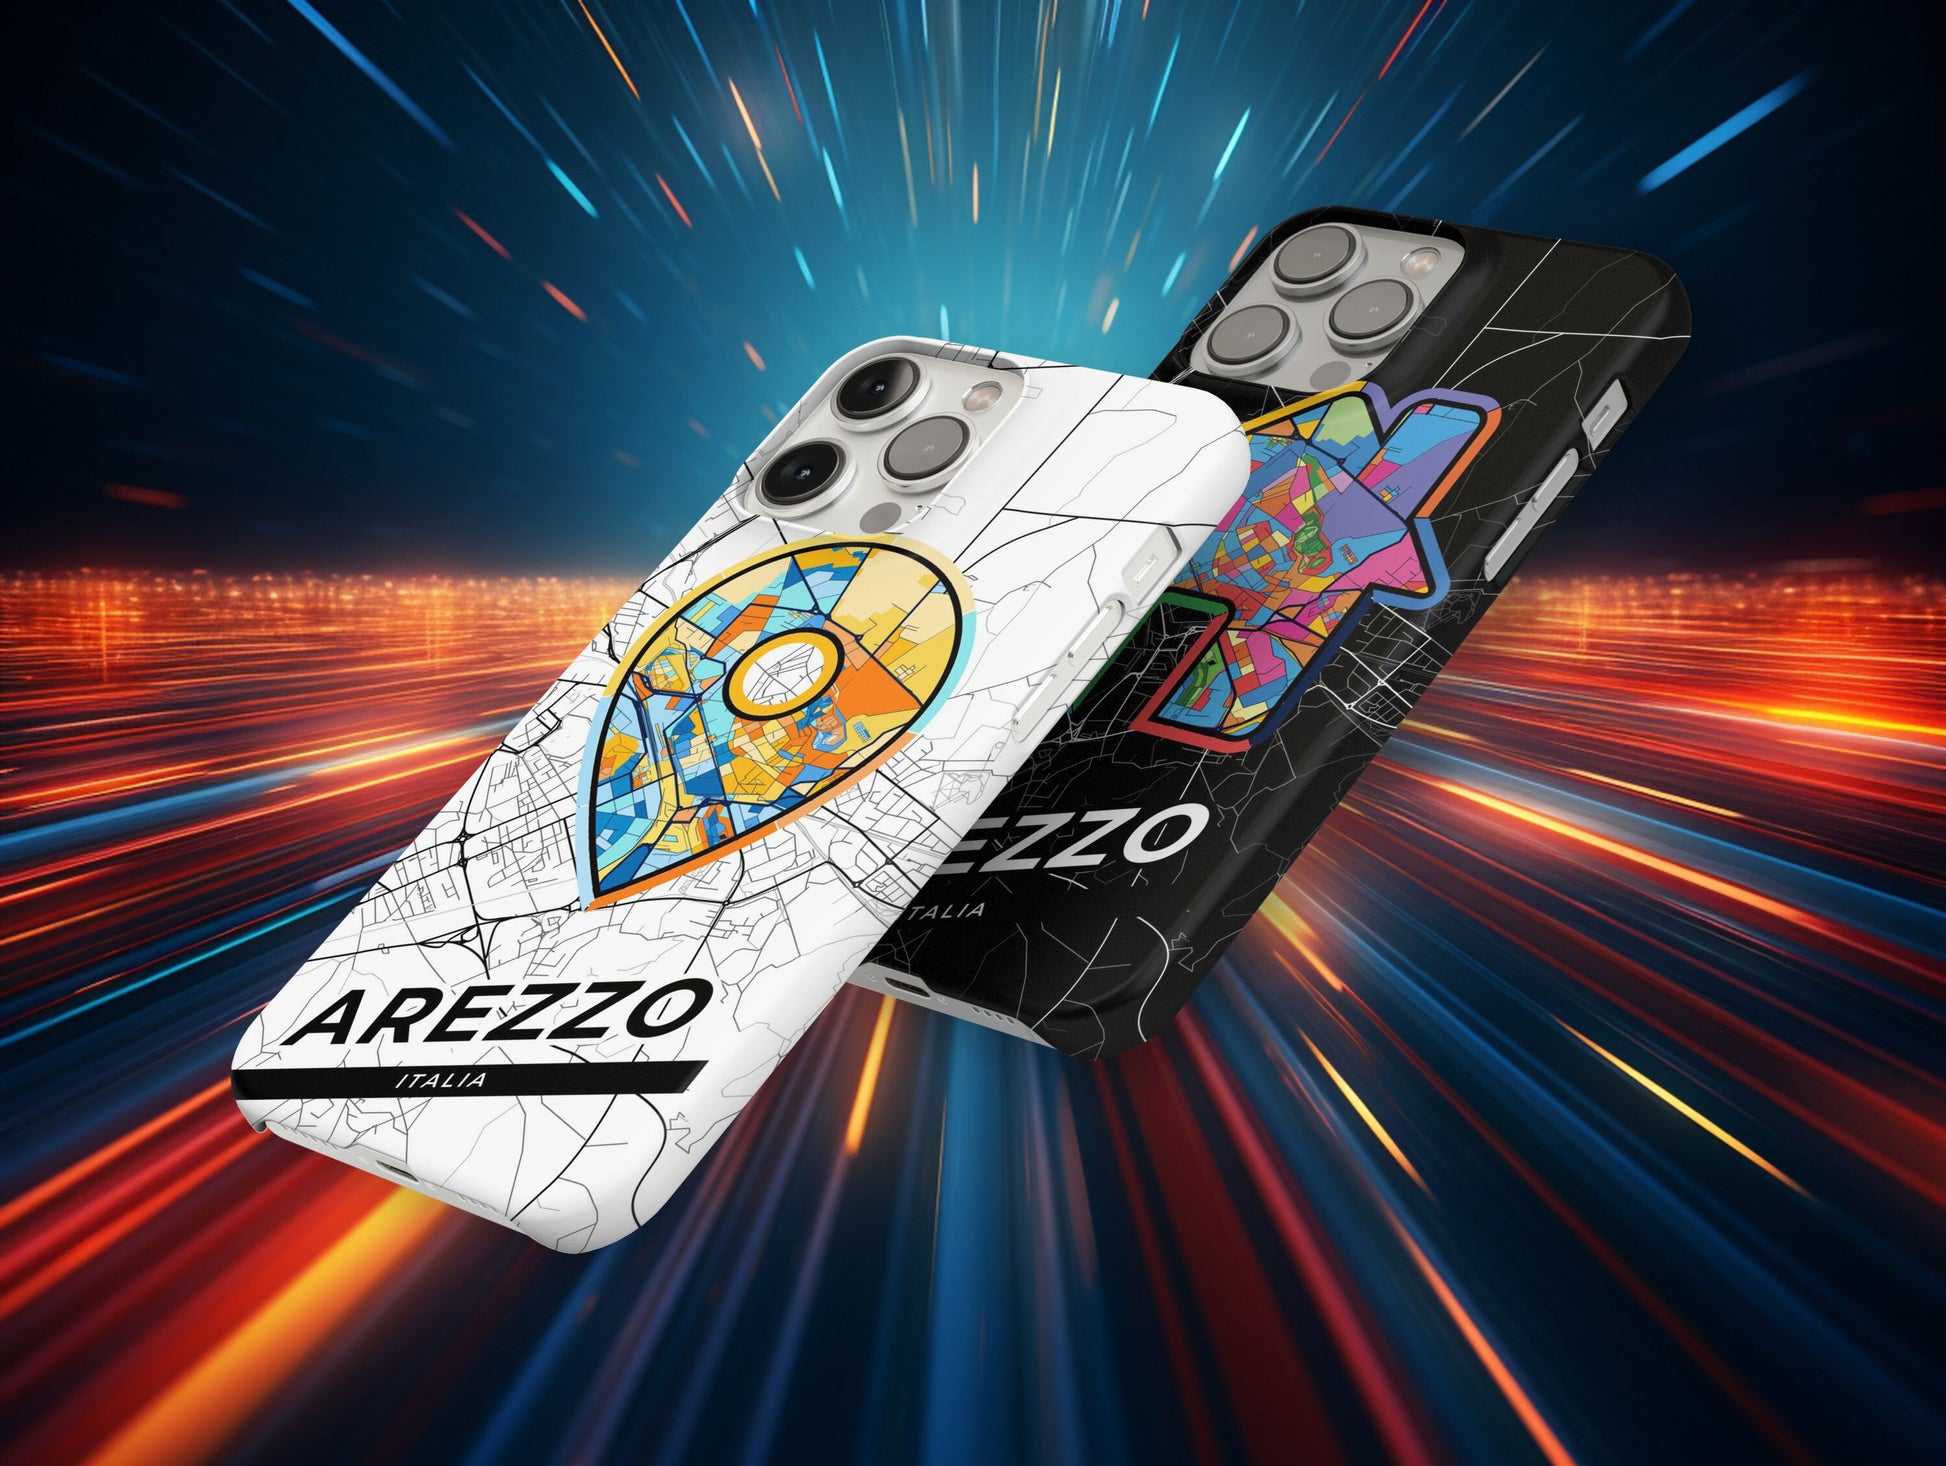 Arezzo Italy slim phone case with colorful icon. Birthday, wedding or housewarming gift. Couple match cases.